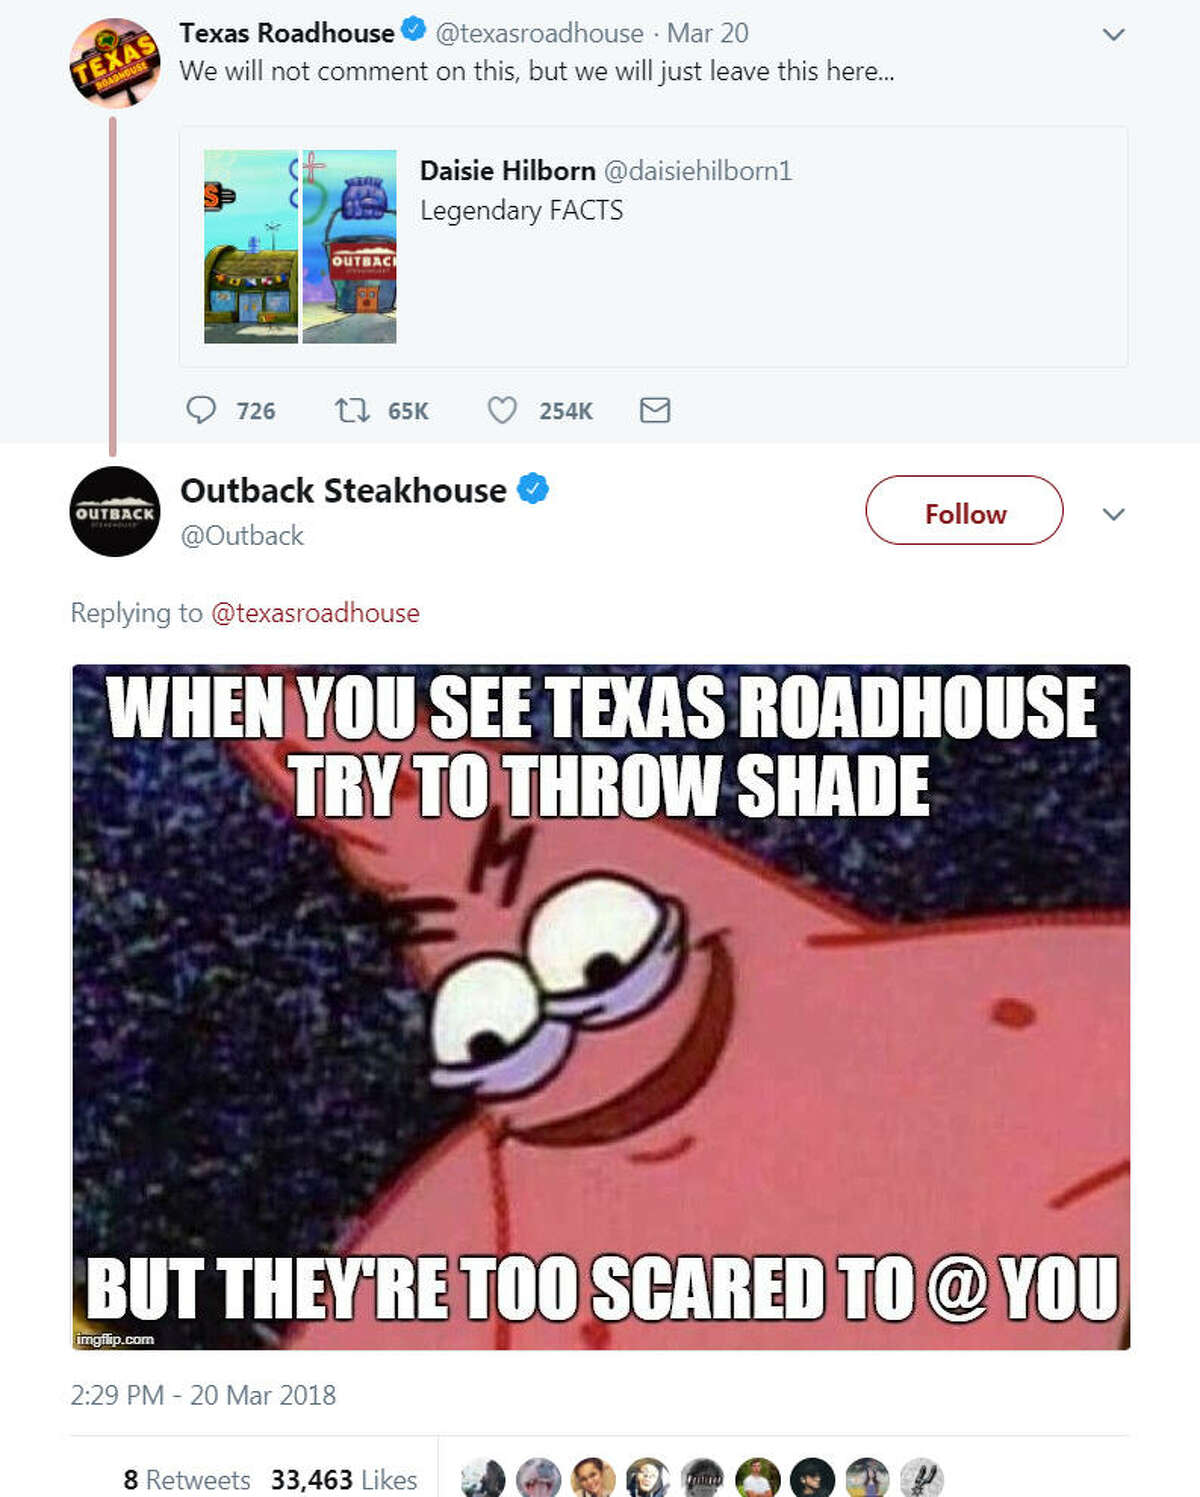 Texas Roadhouse and Outback Steakhouse have been taking shots at one another on Twitter to the joy of competitors like Logan's Roadhouse.